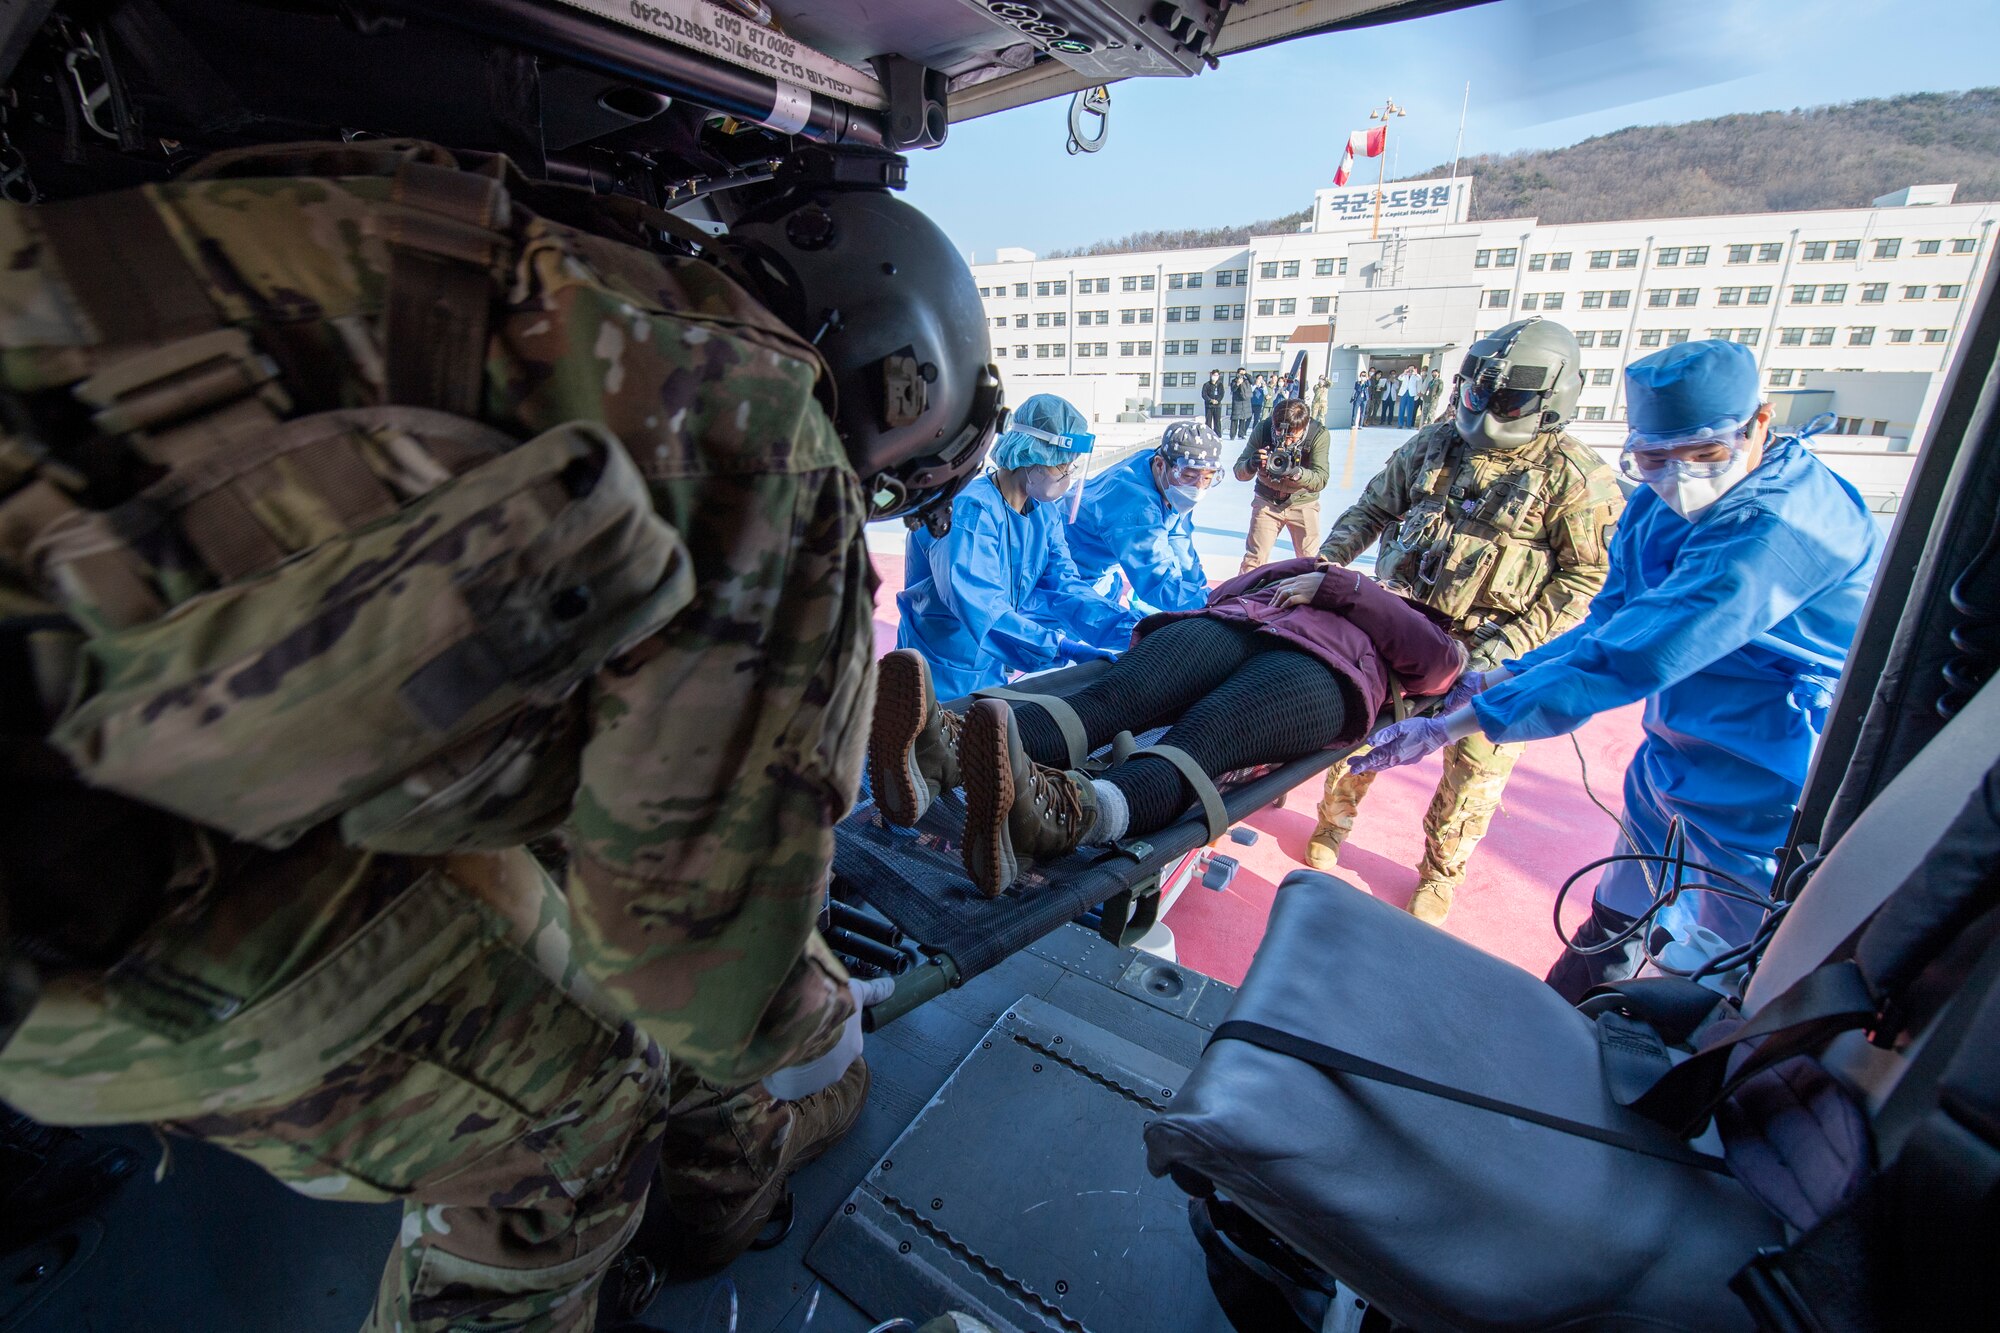 U.S. Army Staff Sgt. Michael Mongia, 3-2 General Support Aviation Battalion flight paramedic, left, Spc. Noah Quevedo 32nd GSAB crew chief, and Republic of Korea Armed Forces Trauma Center (AFTC) personnel unload U.S. Air Force Master Sgt. Szymanski, simulated trauma patient from a HH-60M Black Hawk, onto the helipad at the ROK AFTC, Republic of Korea, Feb. 28, 2023. The 3-2 GSAB personnel worked directly with the 51st Medical Group and ROK AFTC to transport the patient from Osan Air Base to the ROK AFTC for further treatment.  (U.S. Air Force photo by Airman 1st Class Aaron Edwards)